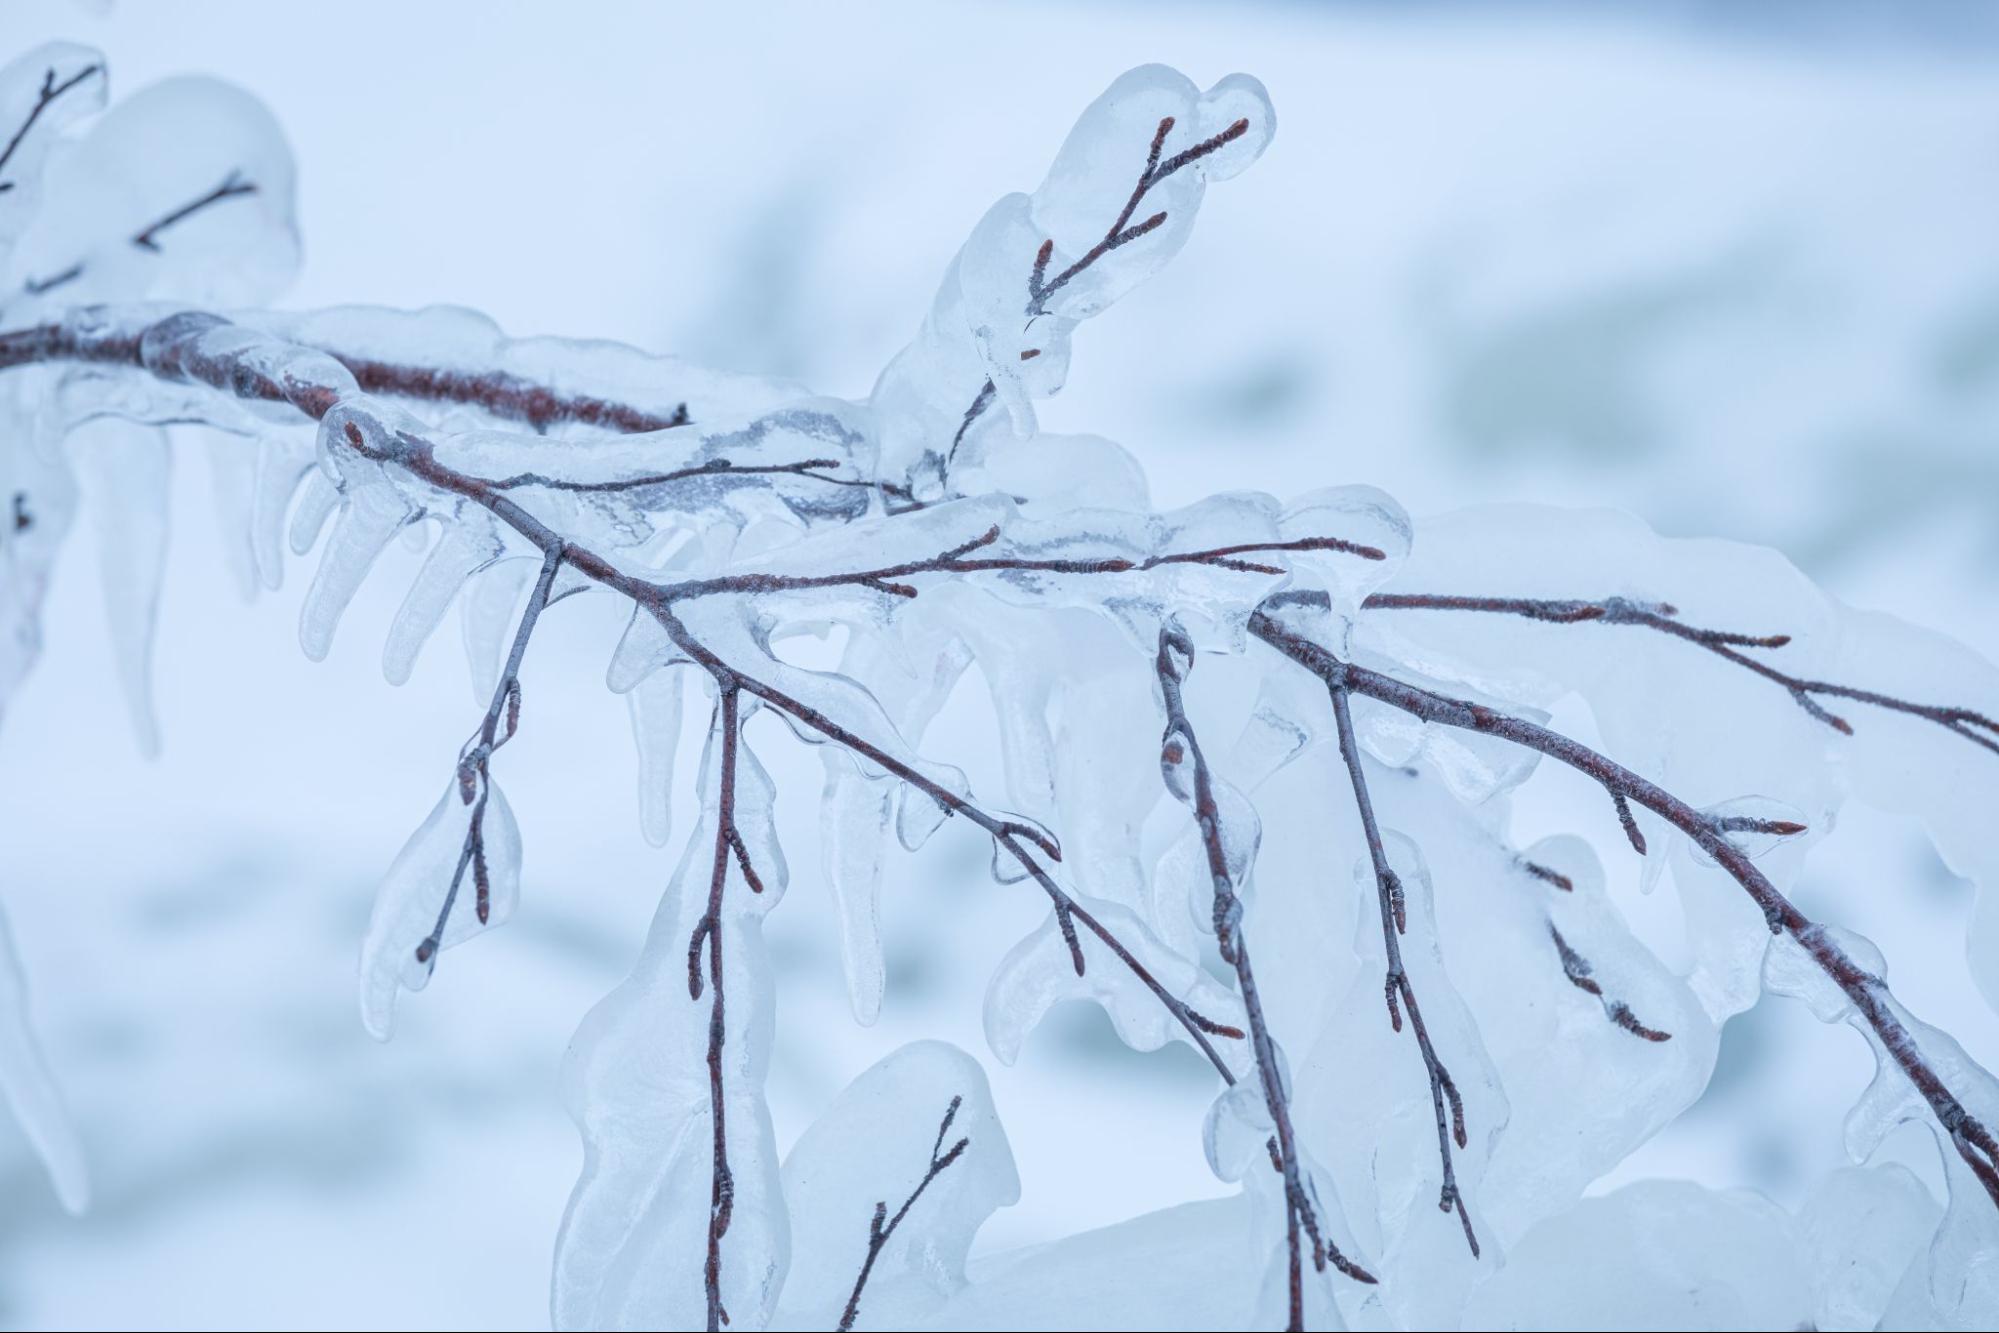 Tree branch weighed down by ice